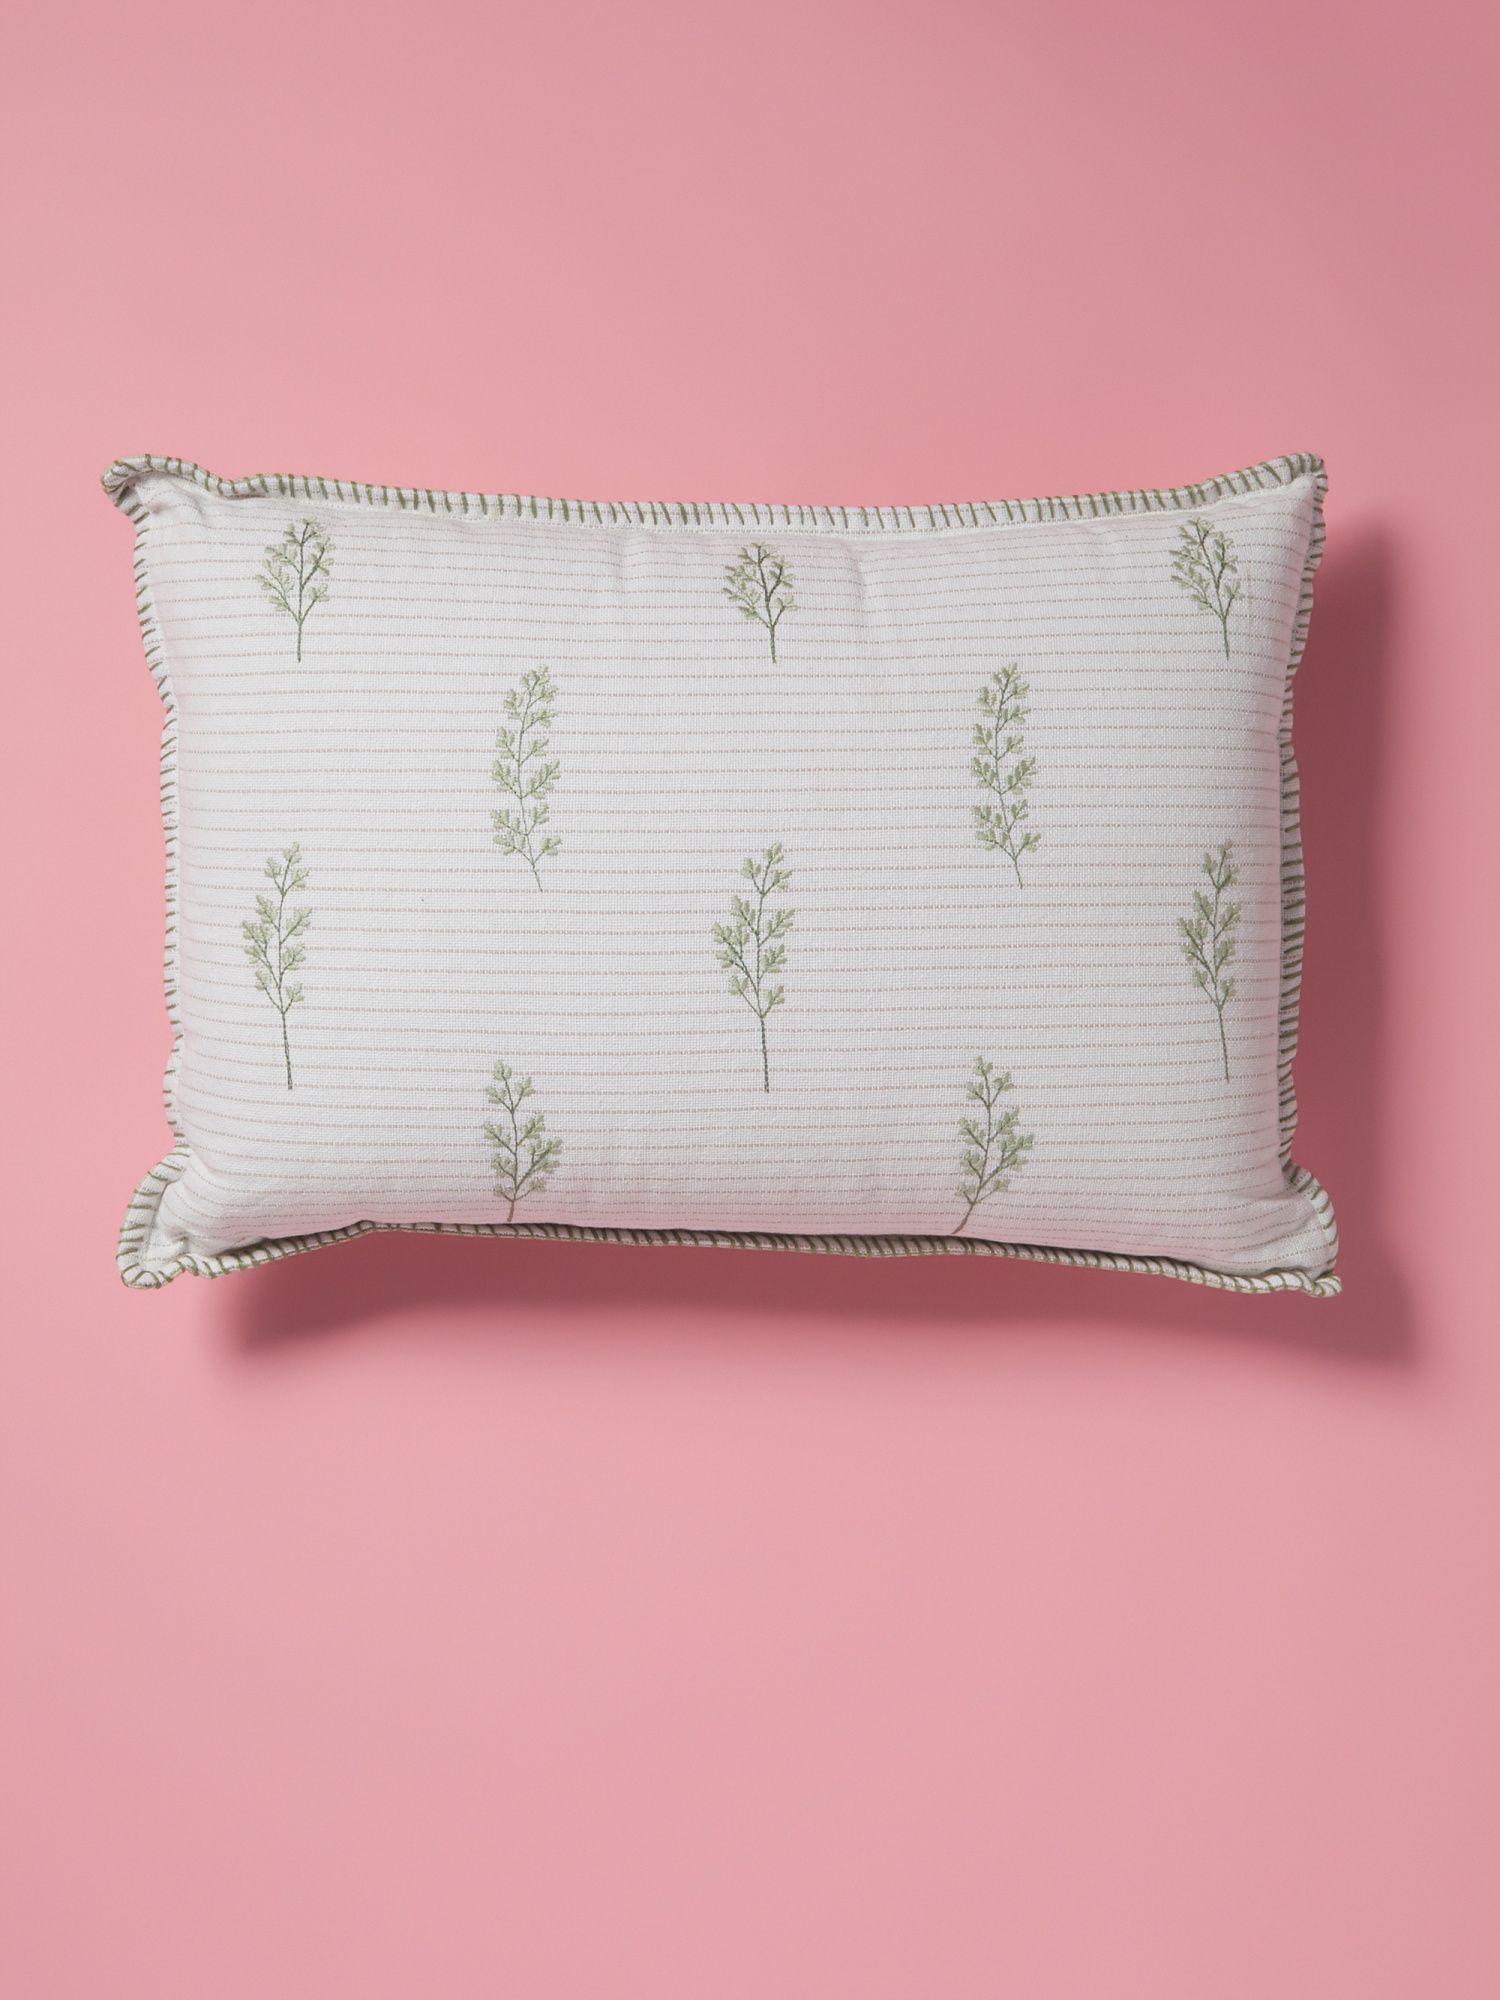 Made In India 14x20 Embroidered Fern Patterned Pillow | Living Room | HomeGoods | HomeGoods